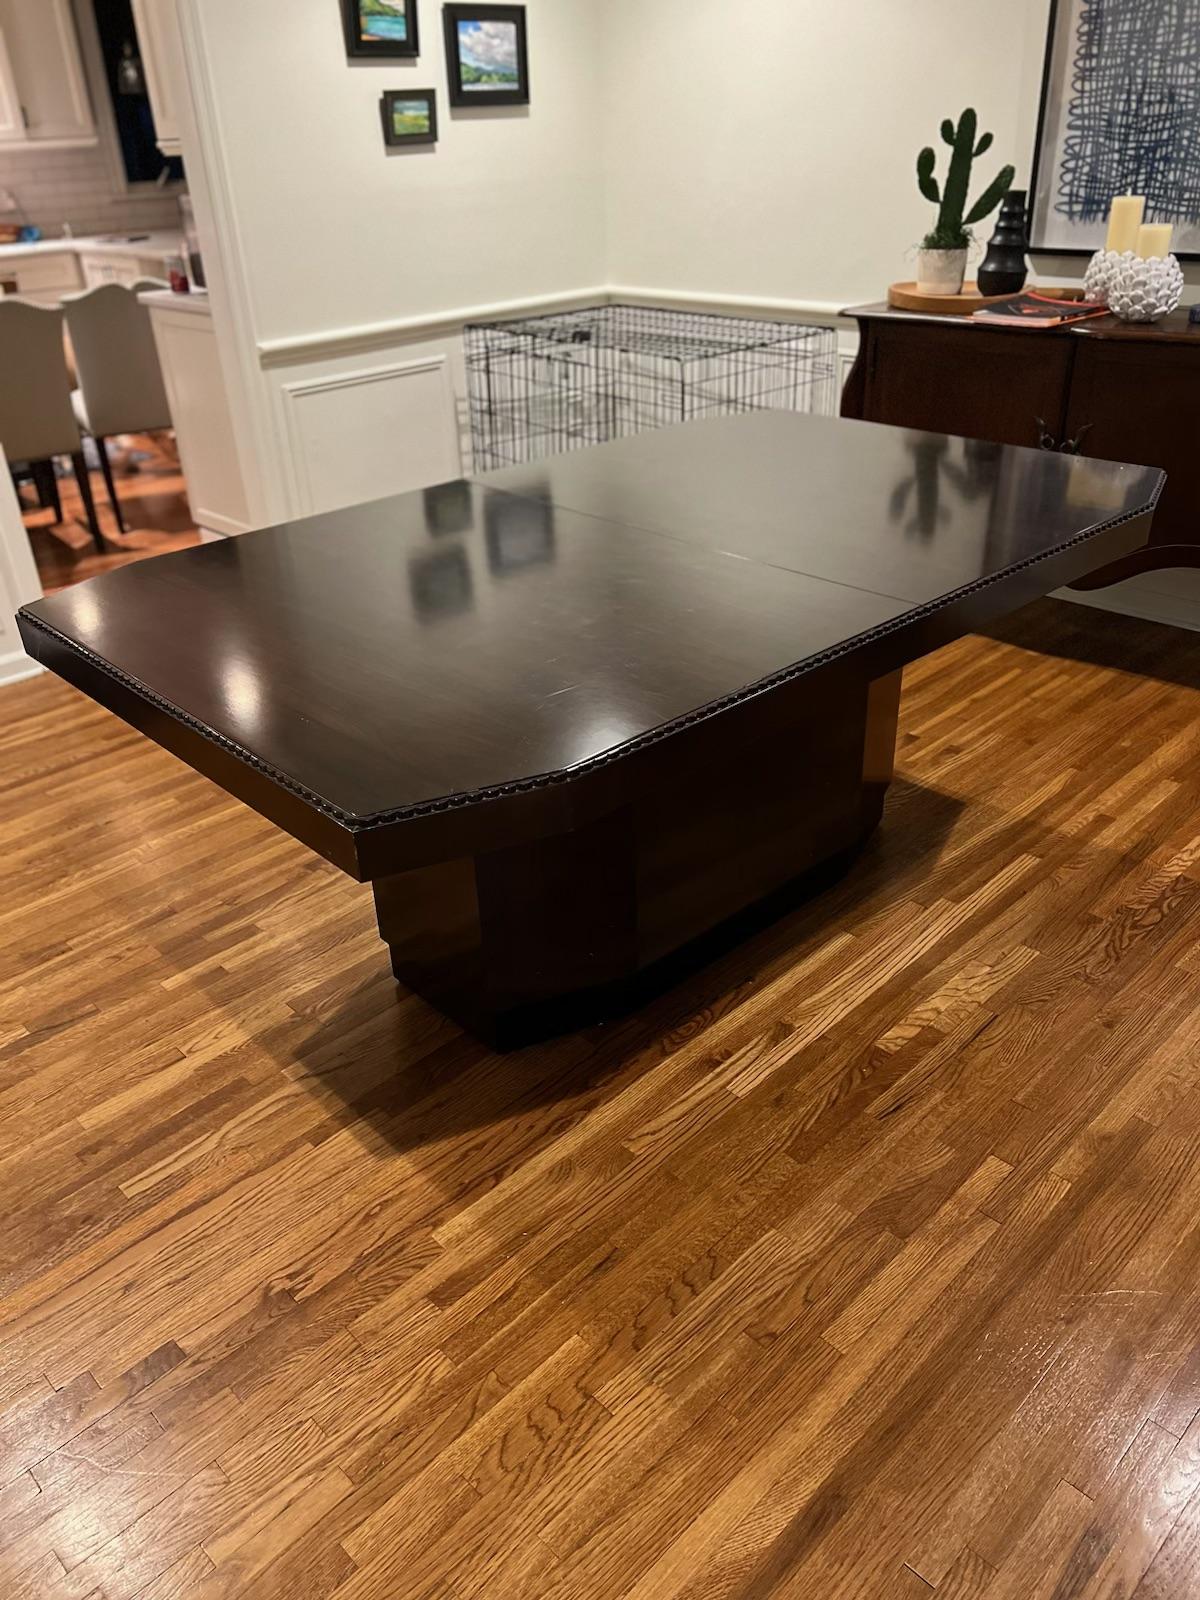 Stunning dining table made by E J Victor for Ralph Lauren in a dark solid wood walnut veneer with sculptured plinth base. Comes with two leaves that measure 20 inches each so when fully extended table is 9 ft. (108